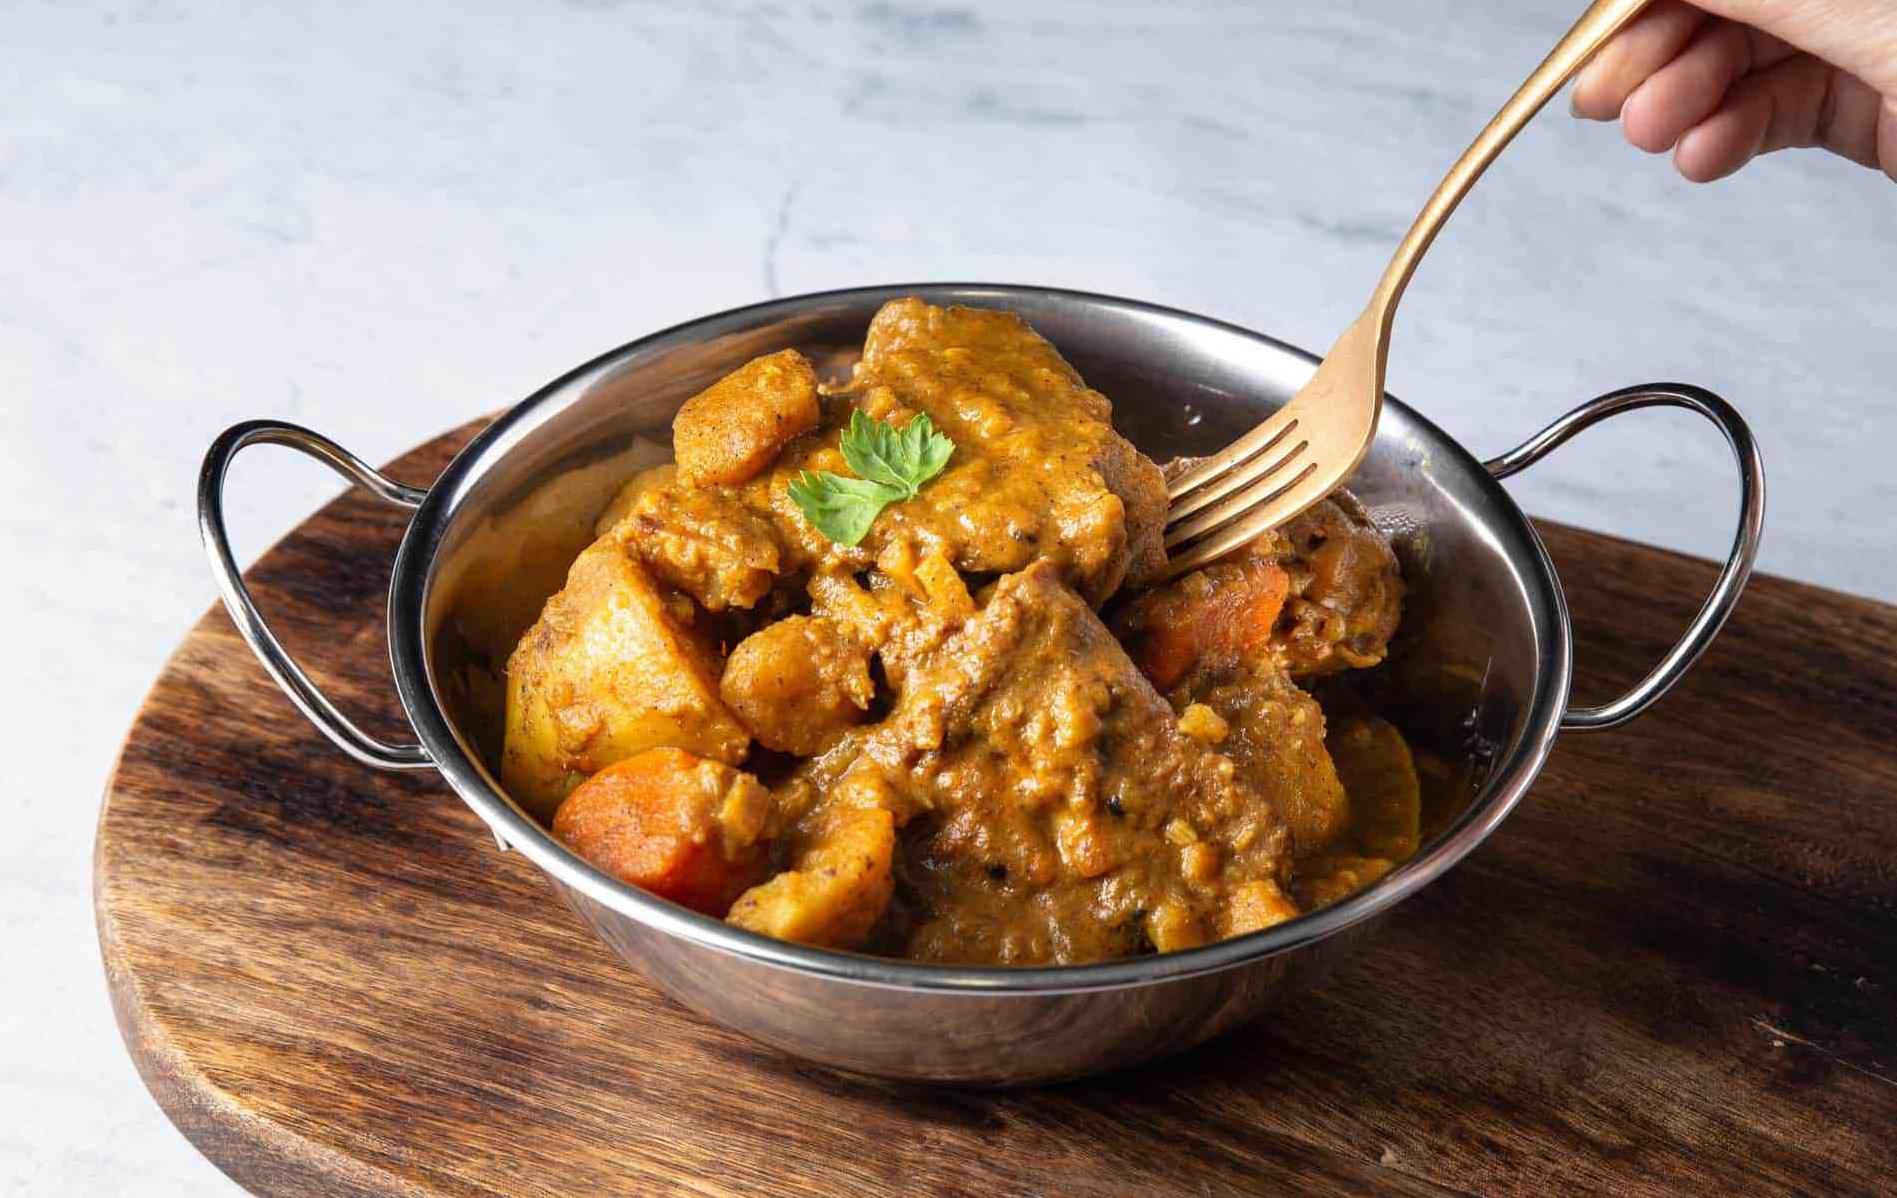 Whip Up a Gourmet Meal with This Easy Curry Chicken Recipe